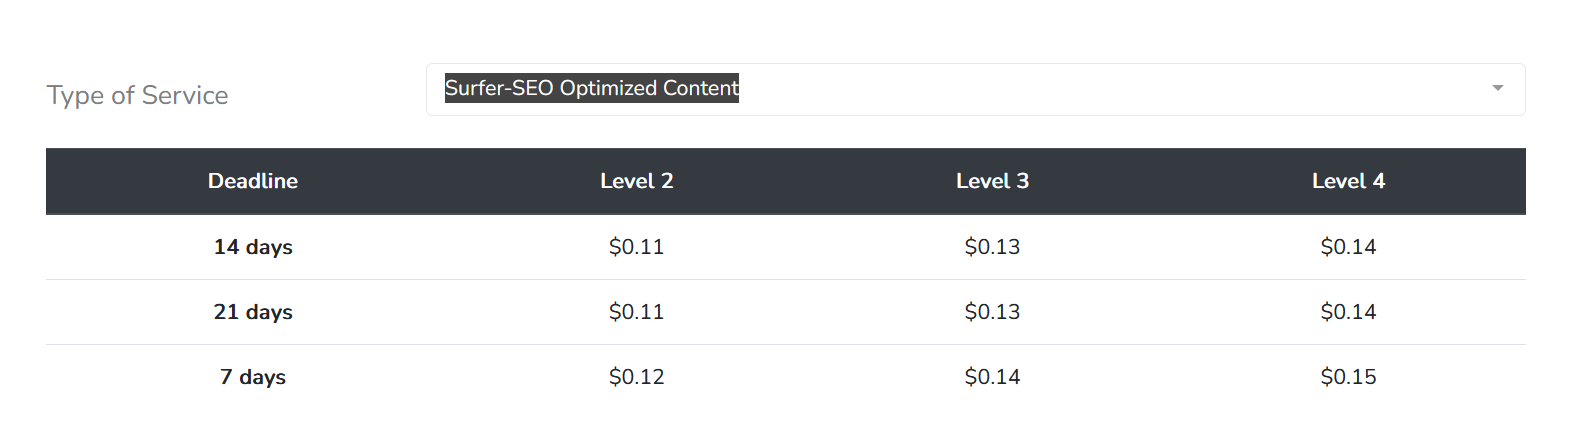 Pricing Table for Surfer-SEO Content